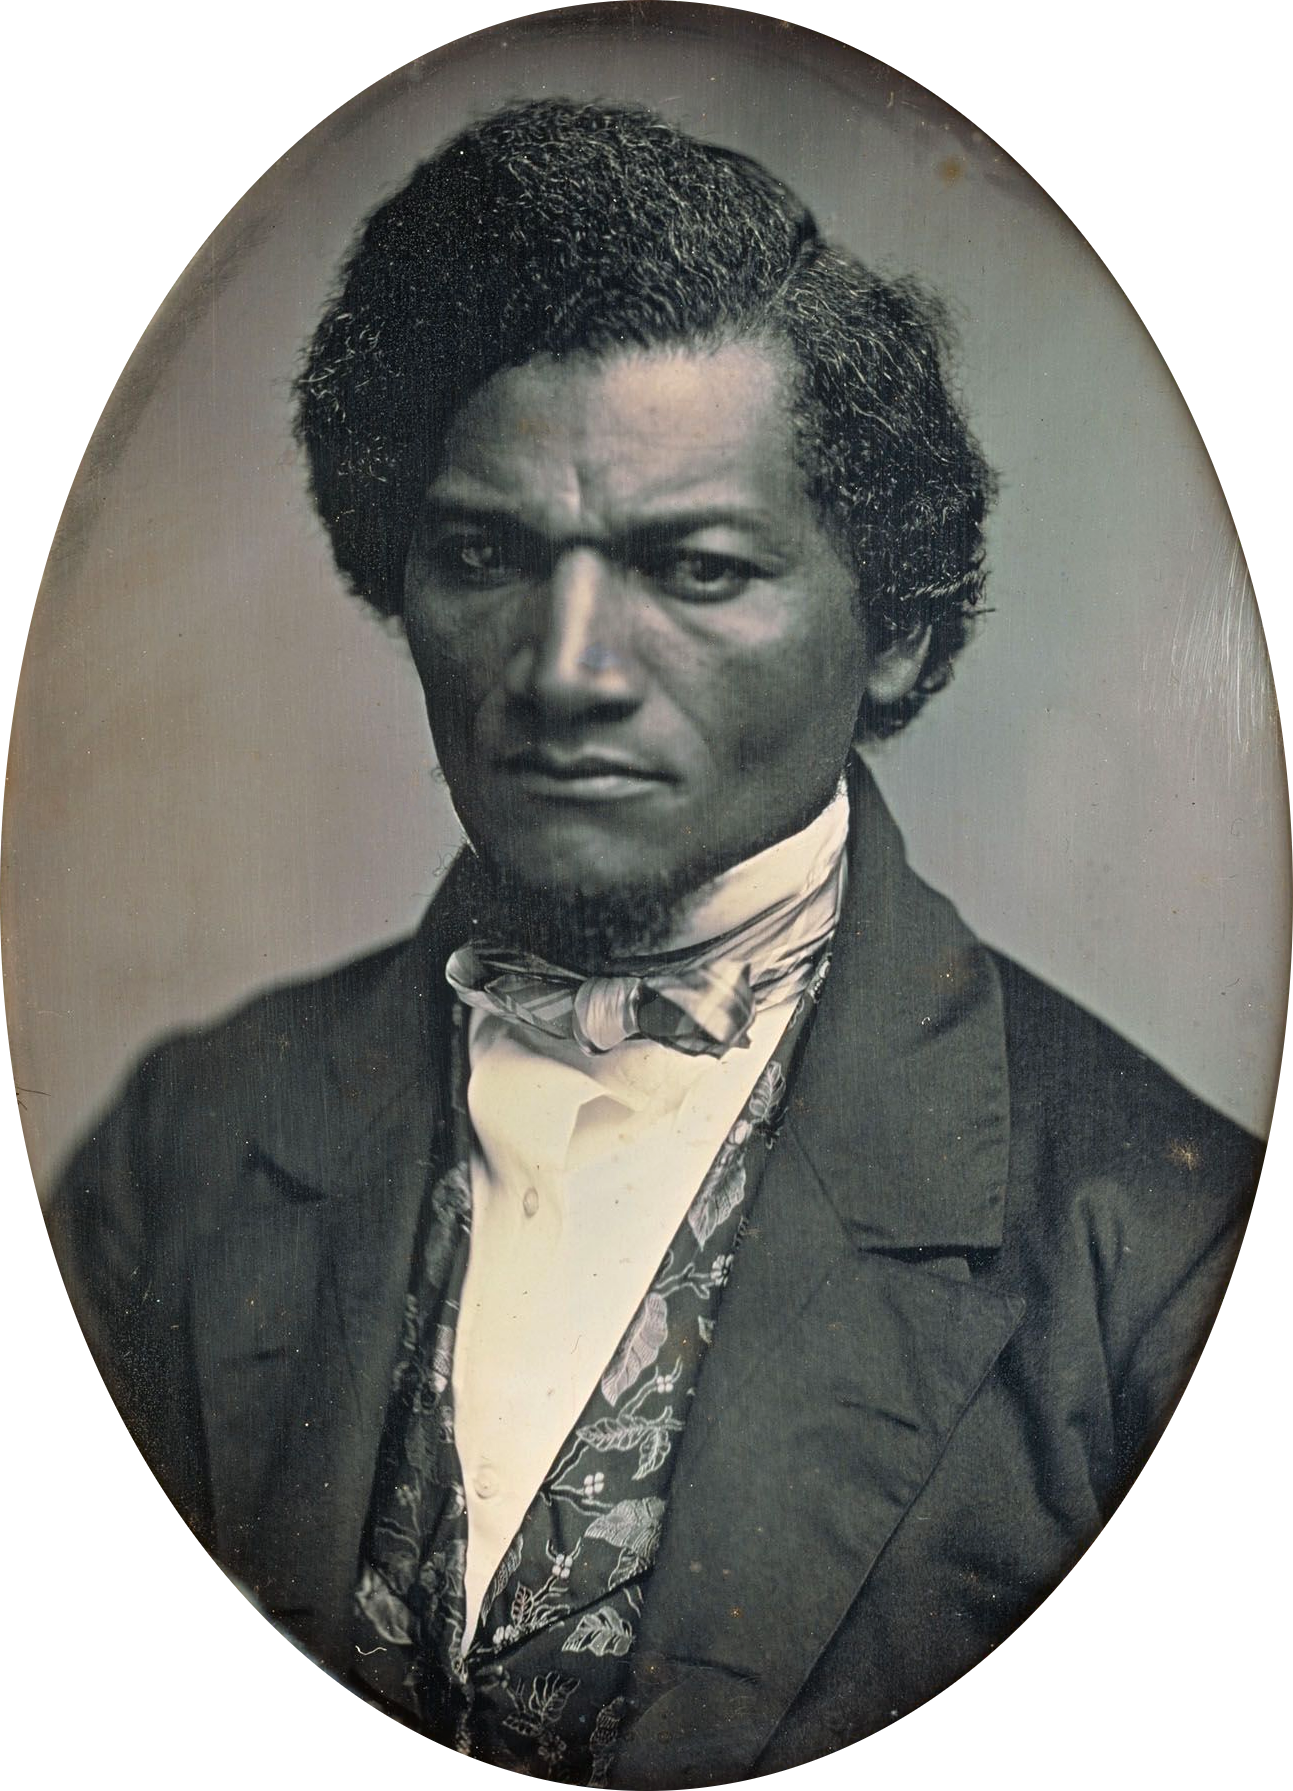 Portrait of Frederick Douglass from Aug 1852